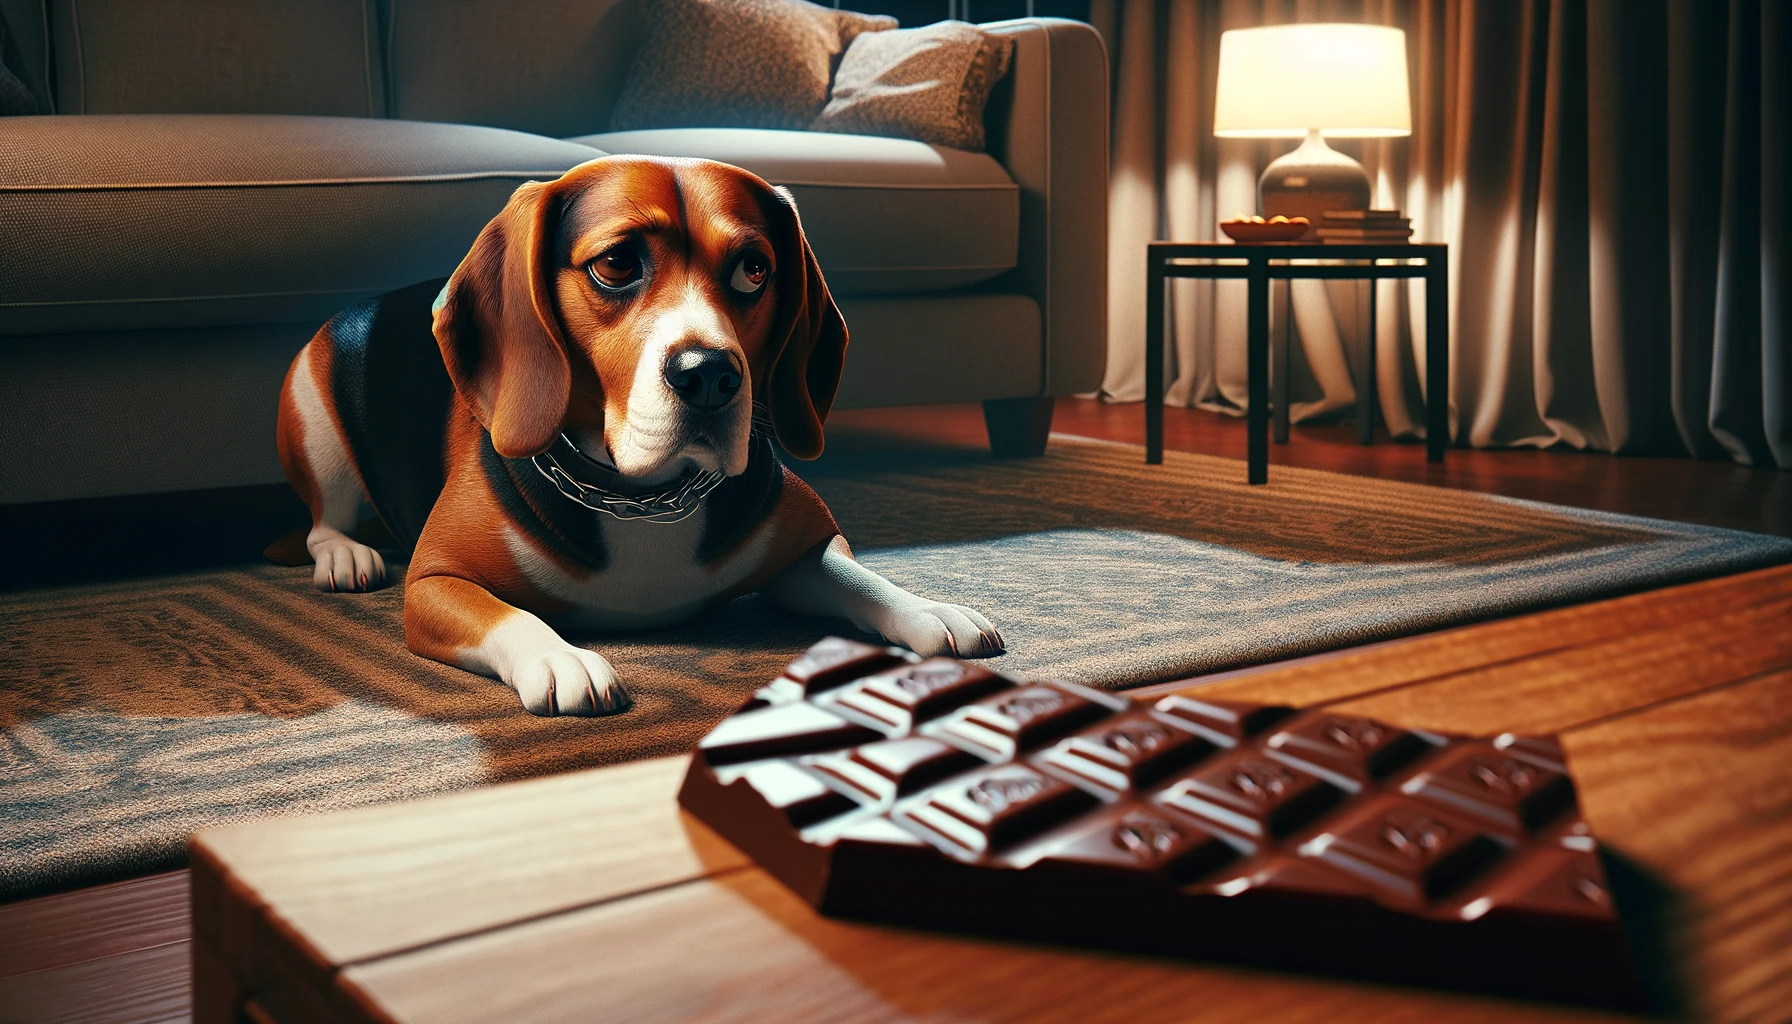 Beagle Lab Mix (Beadador) looking away from a table where a chocolate bar is prominently displayed